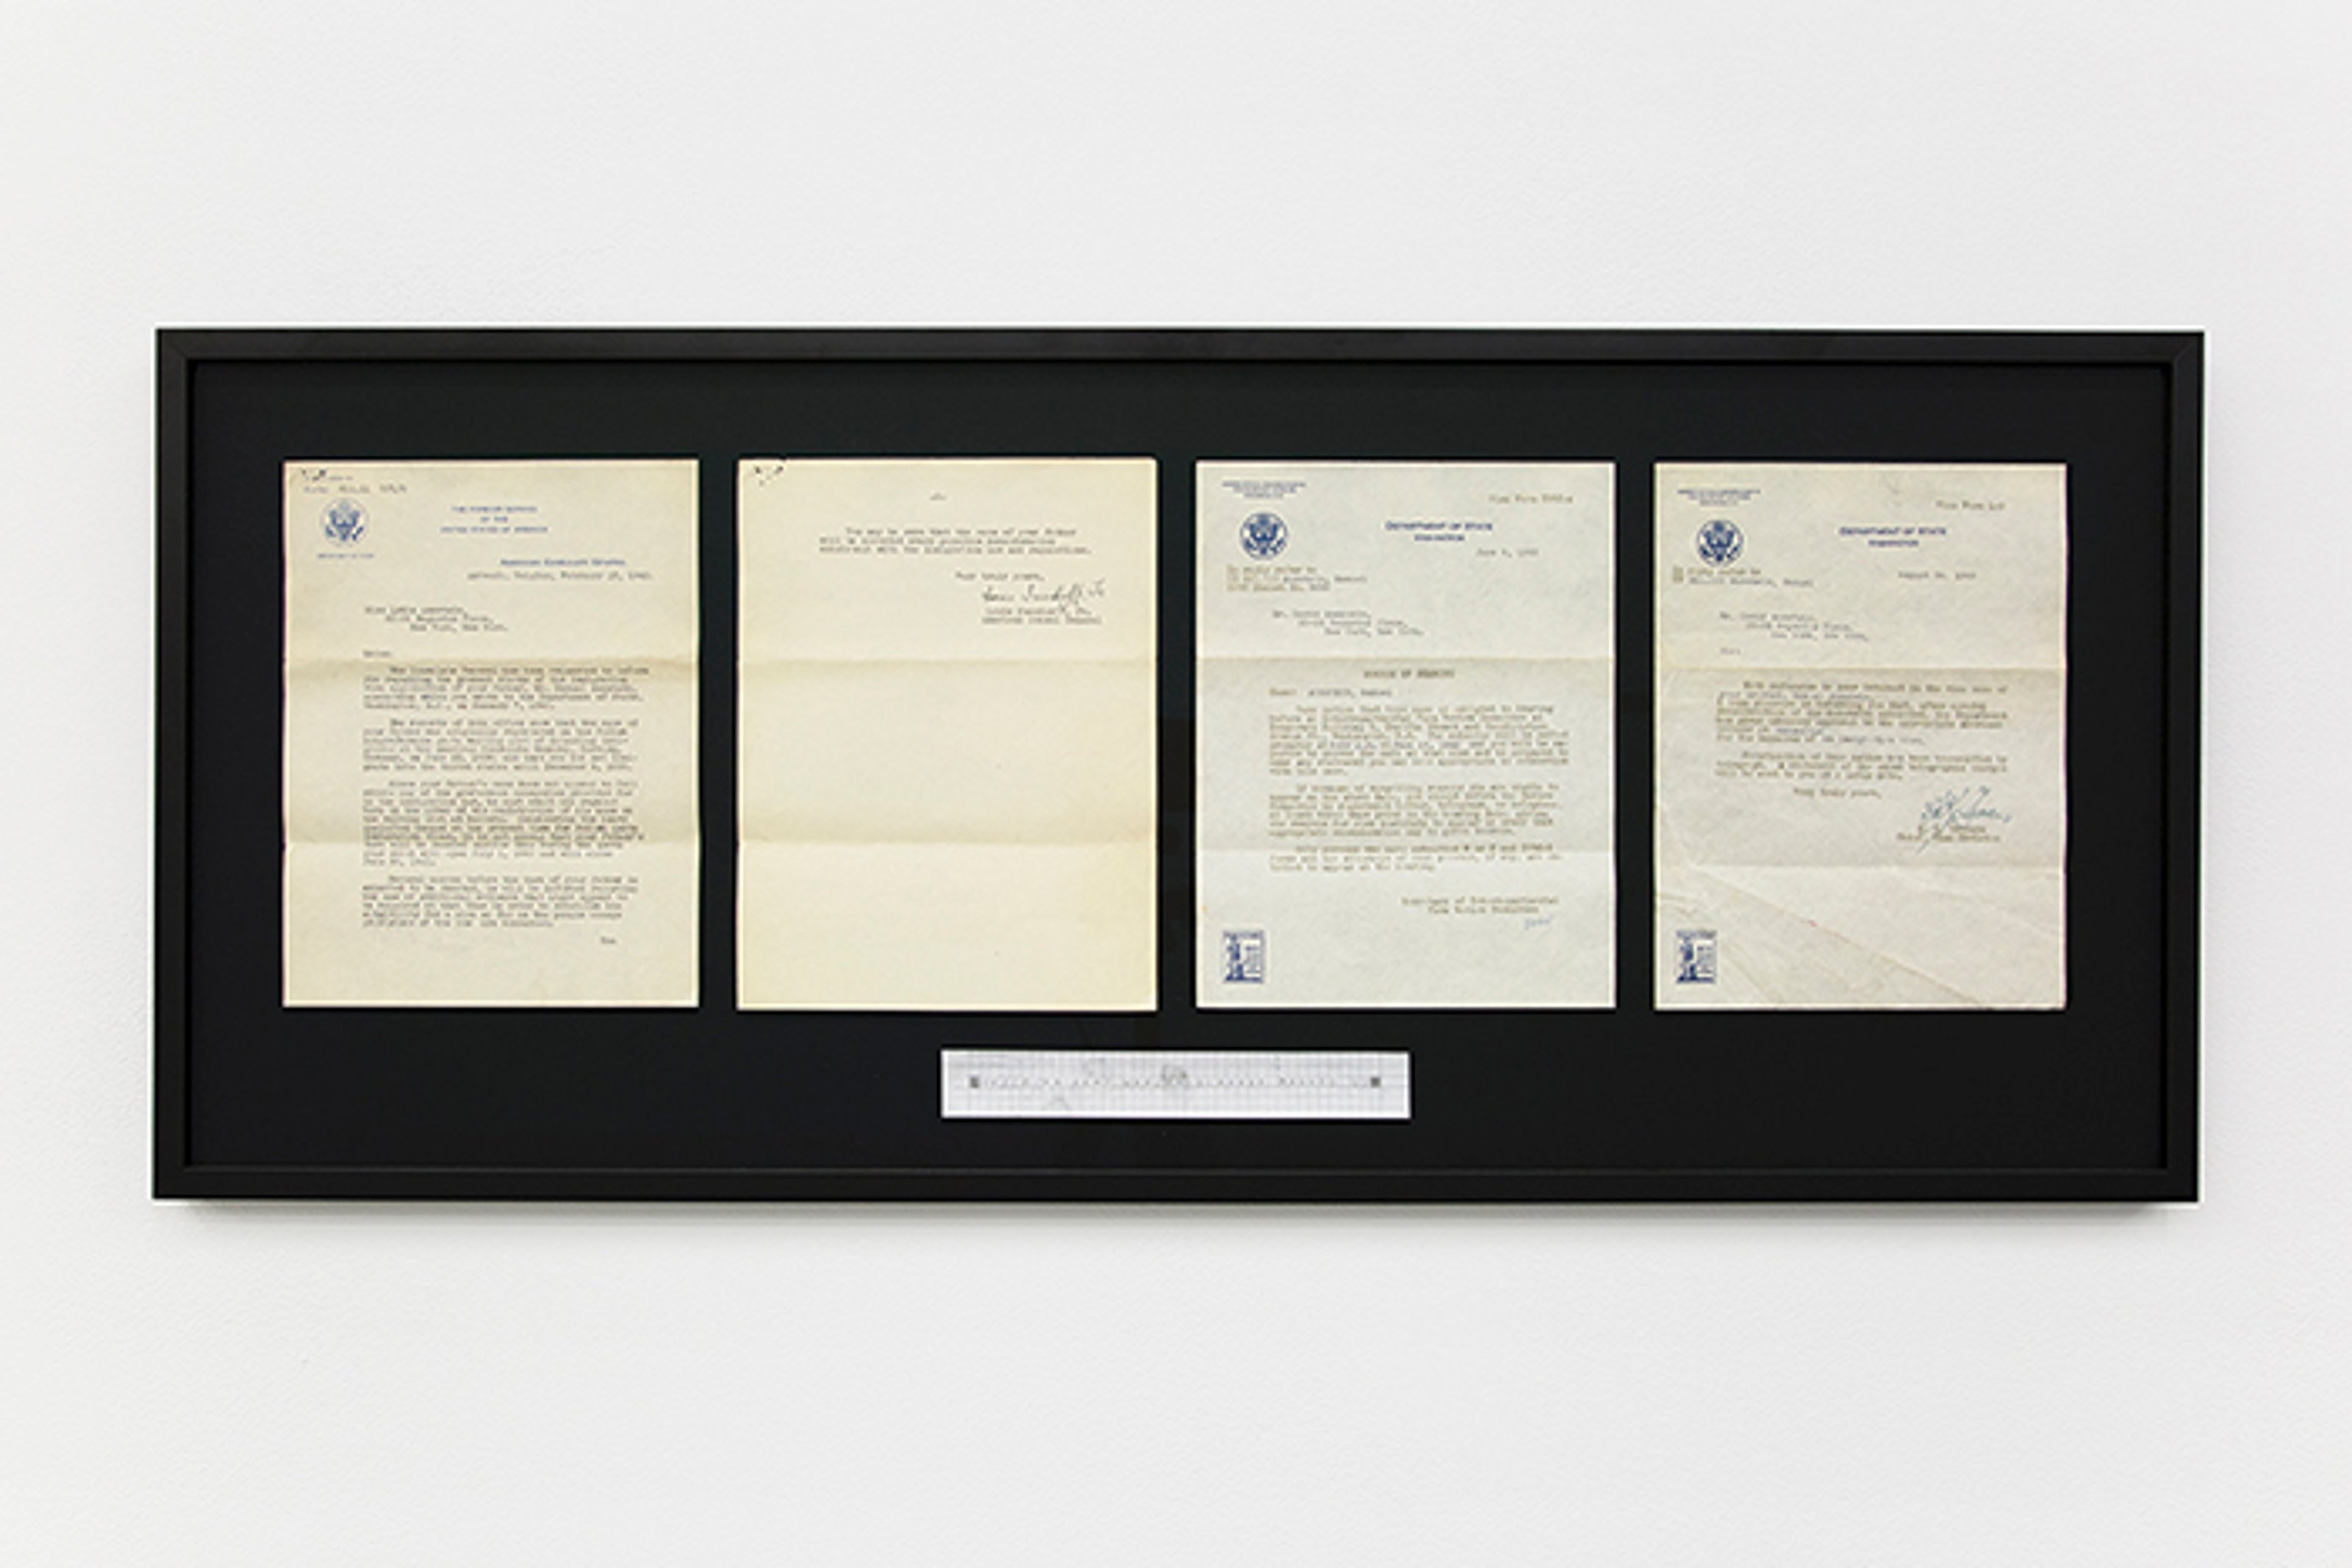 Immigration papers submitted by Samuel Ausstein, framed